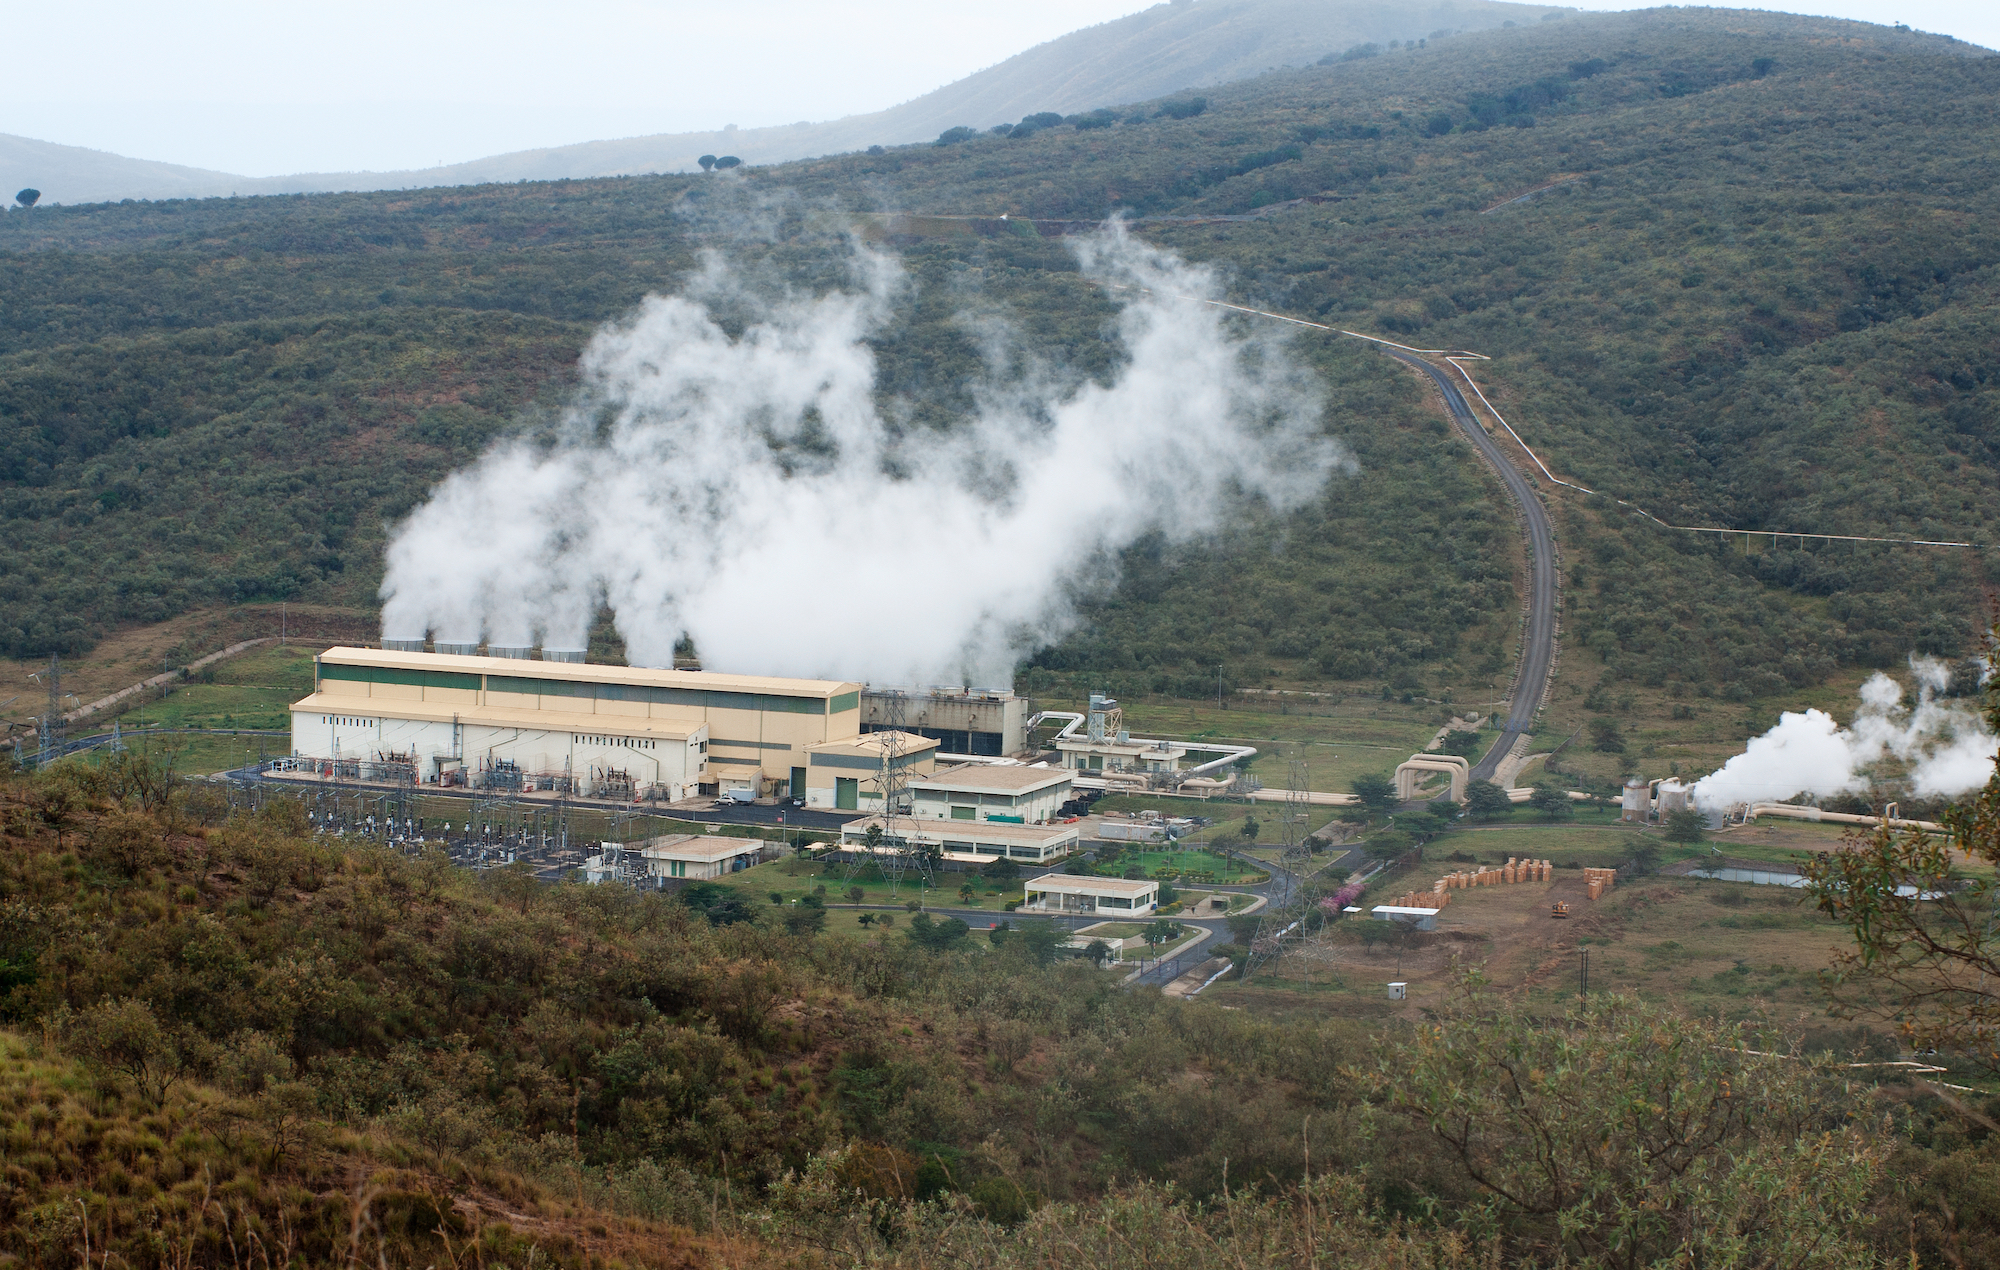 Plumes of steam drift up from a line of cooling towers behind a long, beige building. The structures are set in green, arid valley between two hills.